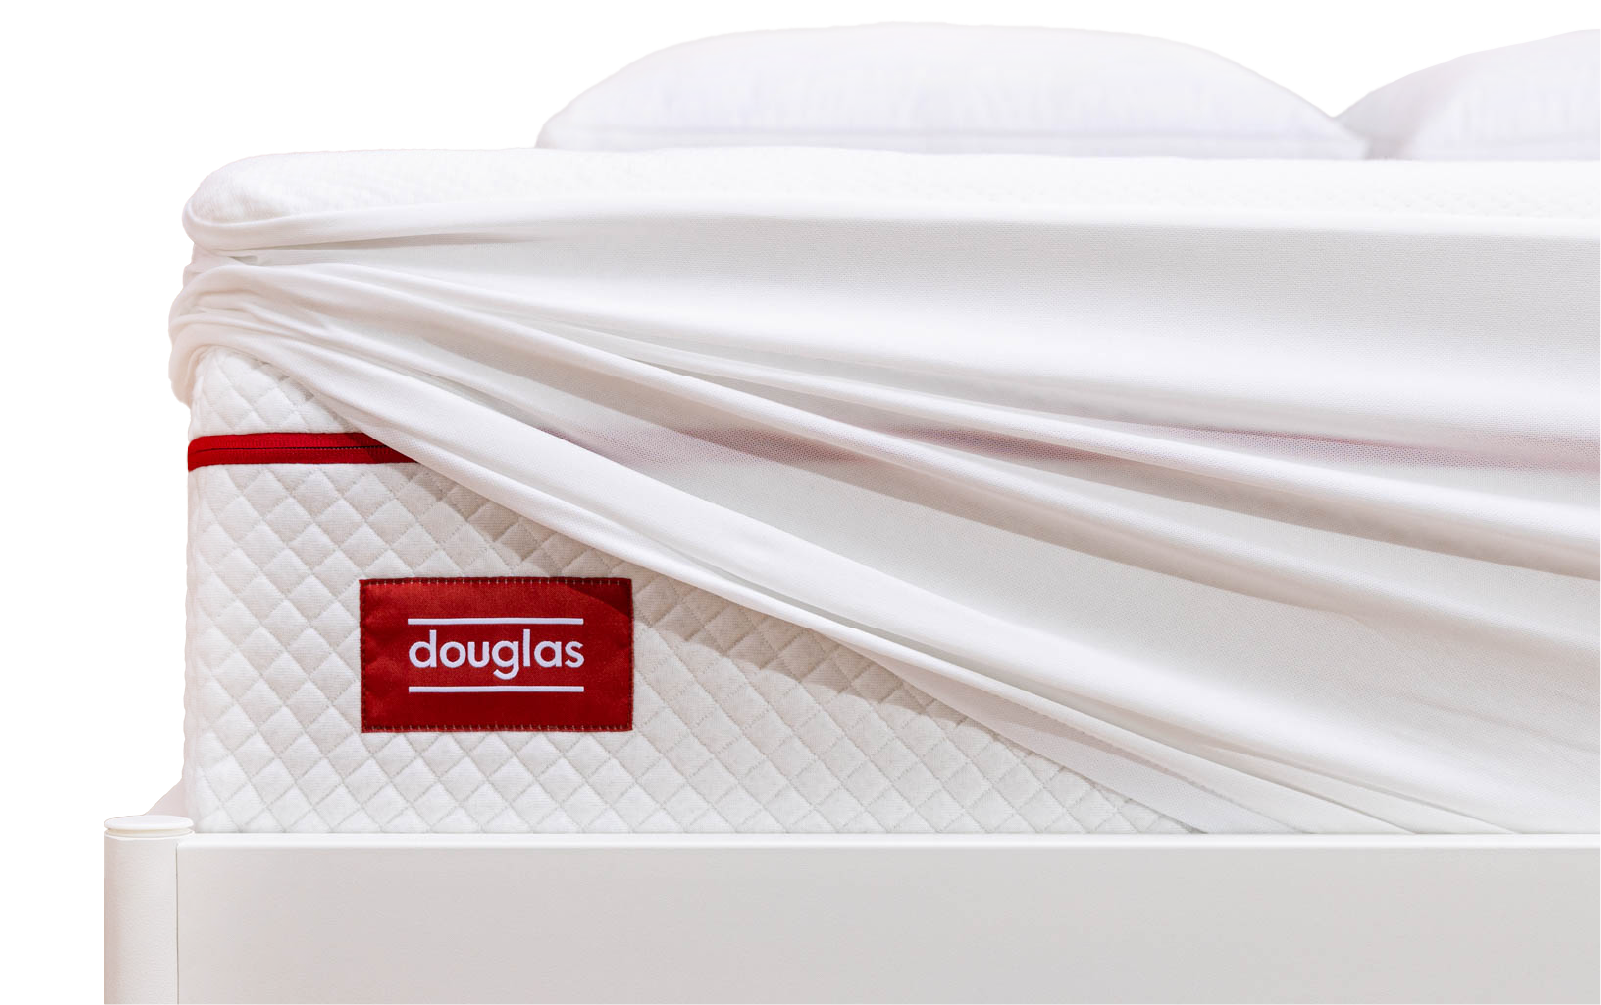 photo of a mattress protector being pulled away from a Douglas mattress